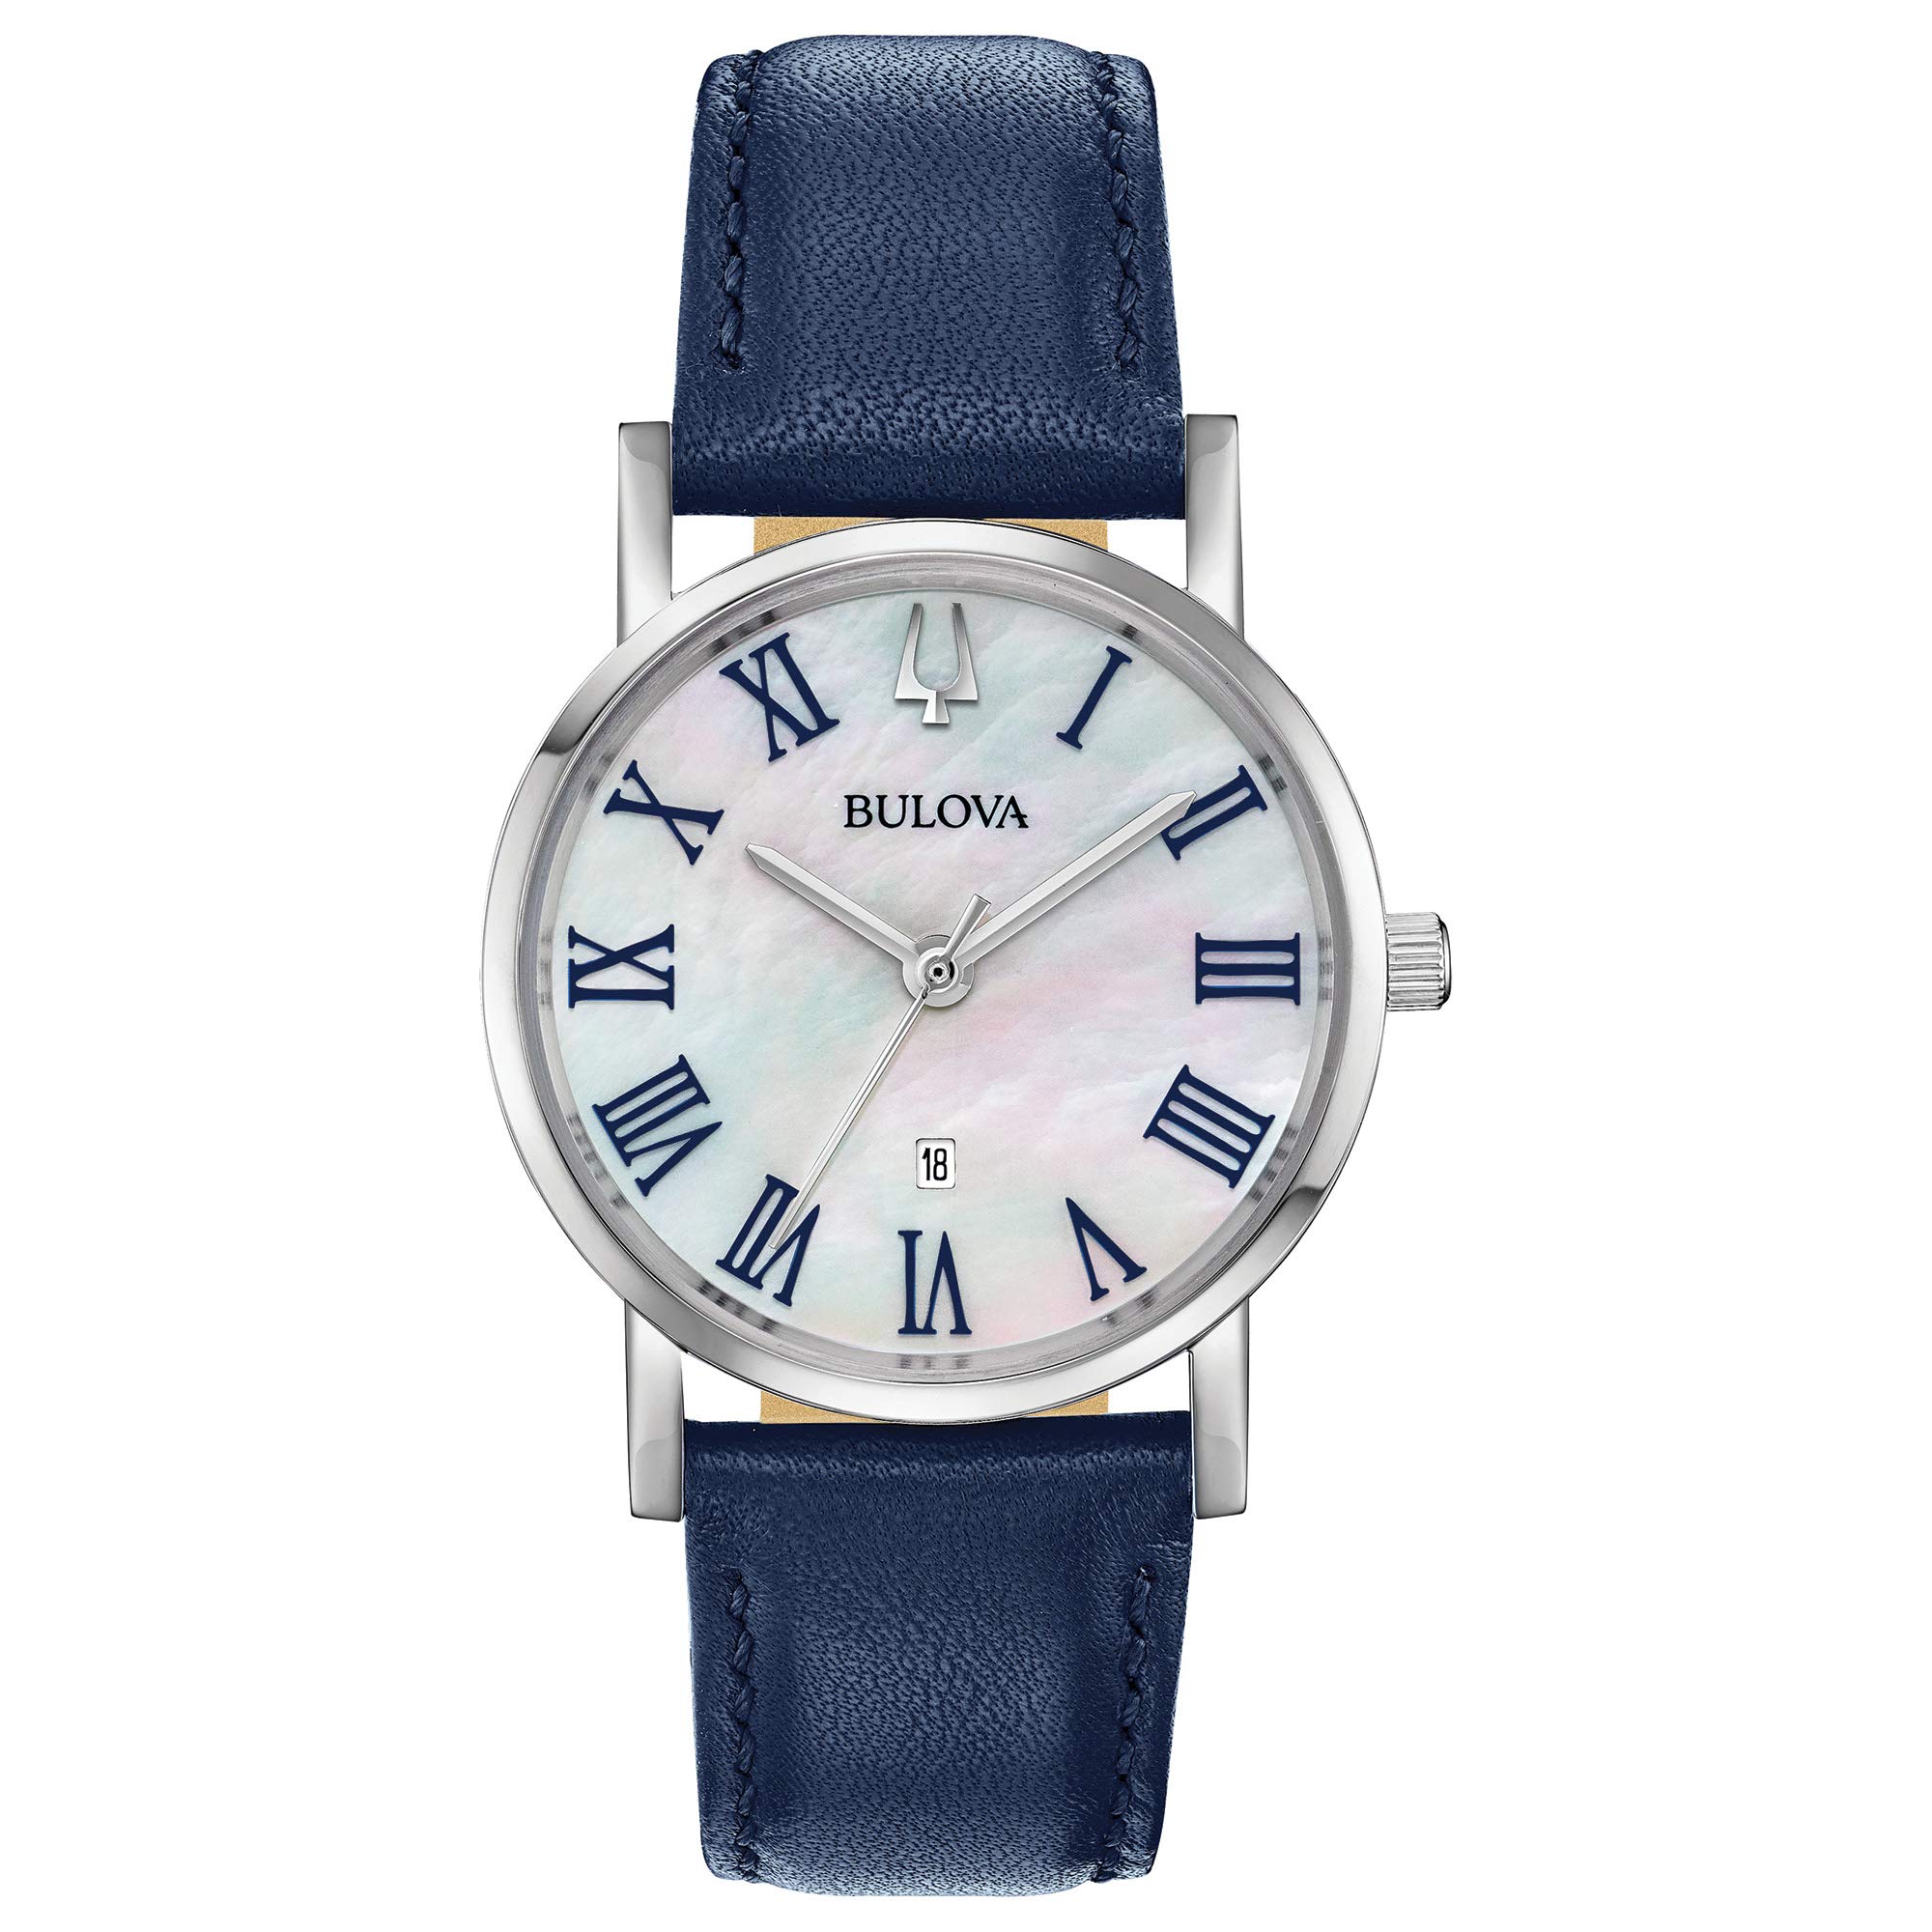 Bulova Classic Quartz Ladies Watch, Stainless Steel with Blue Leather Strap, Silver-Tone (Model: 96M146)